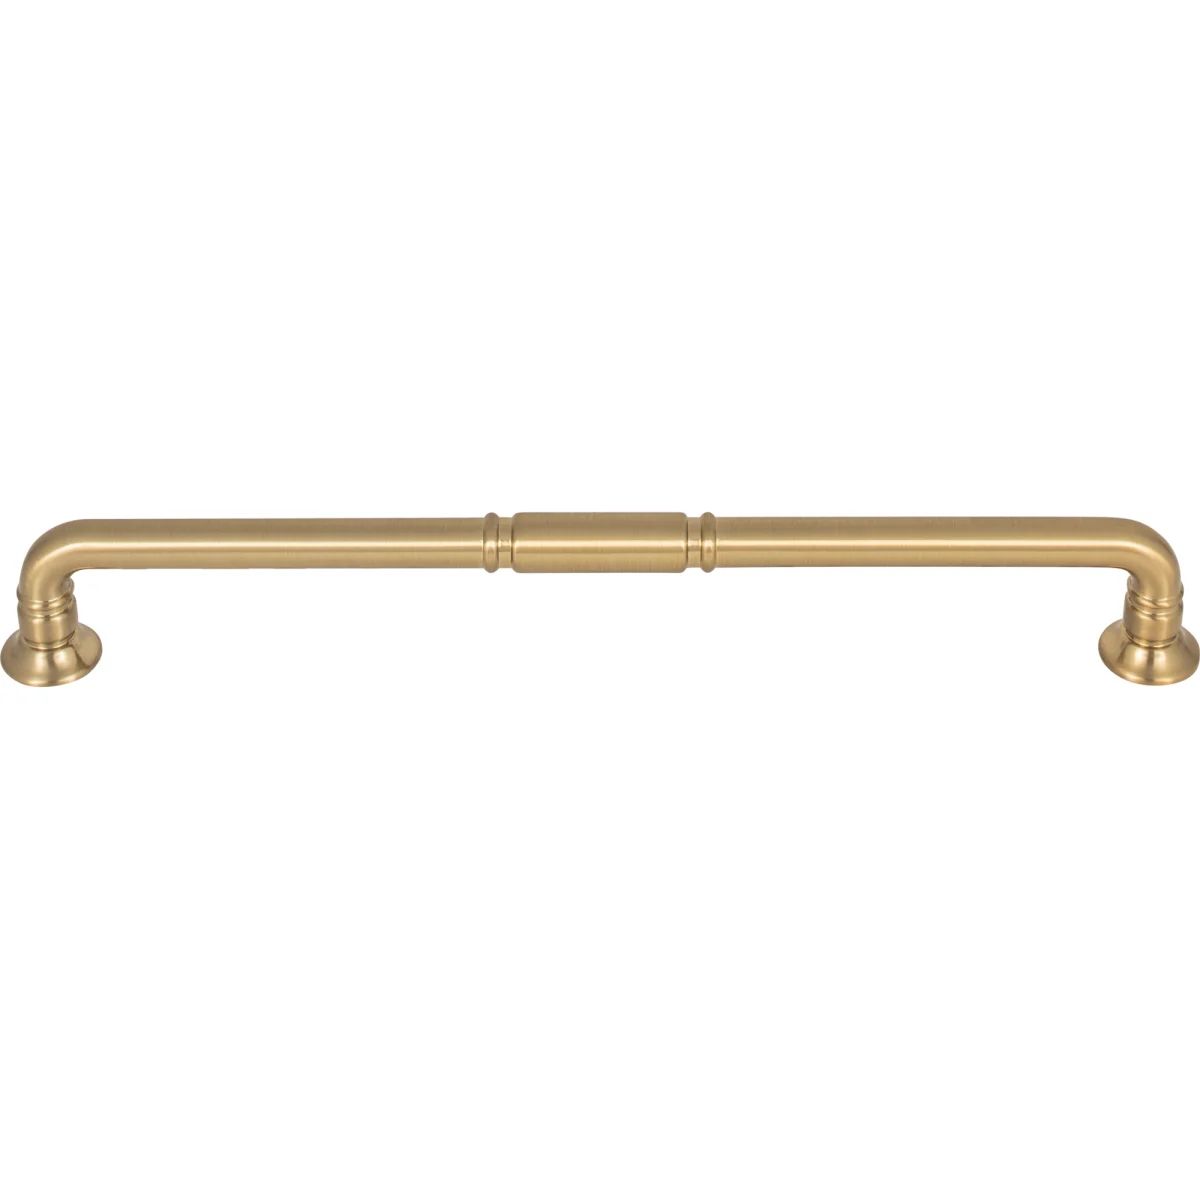 Kent 8-13/16 Inch Center to Center Handle Cabinet Pull | Build.com, Inc.